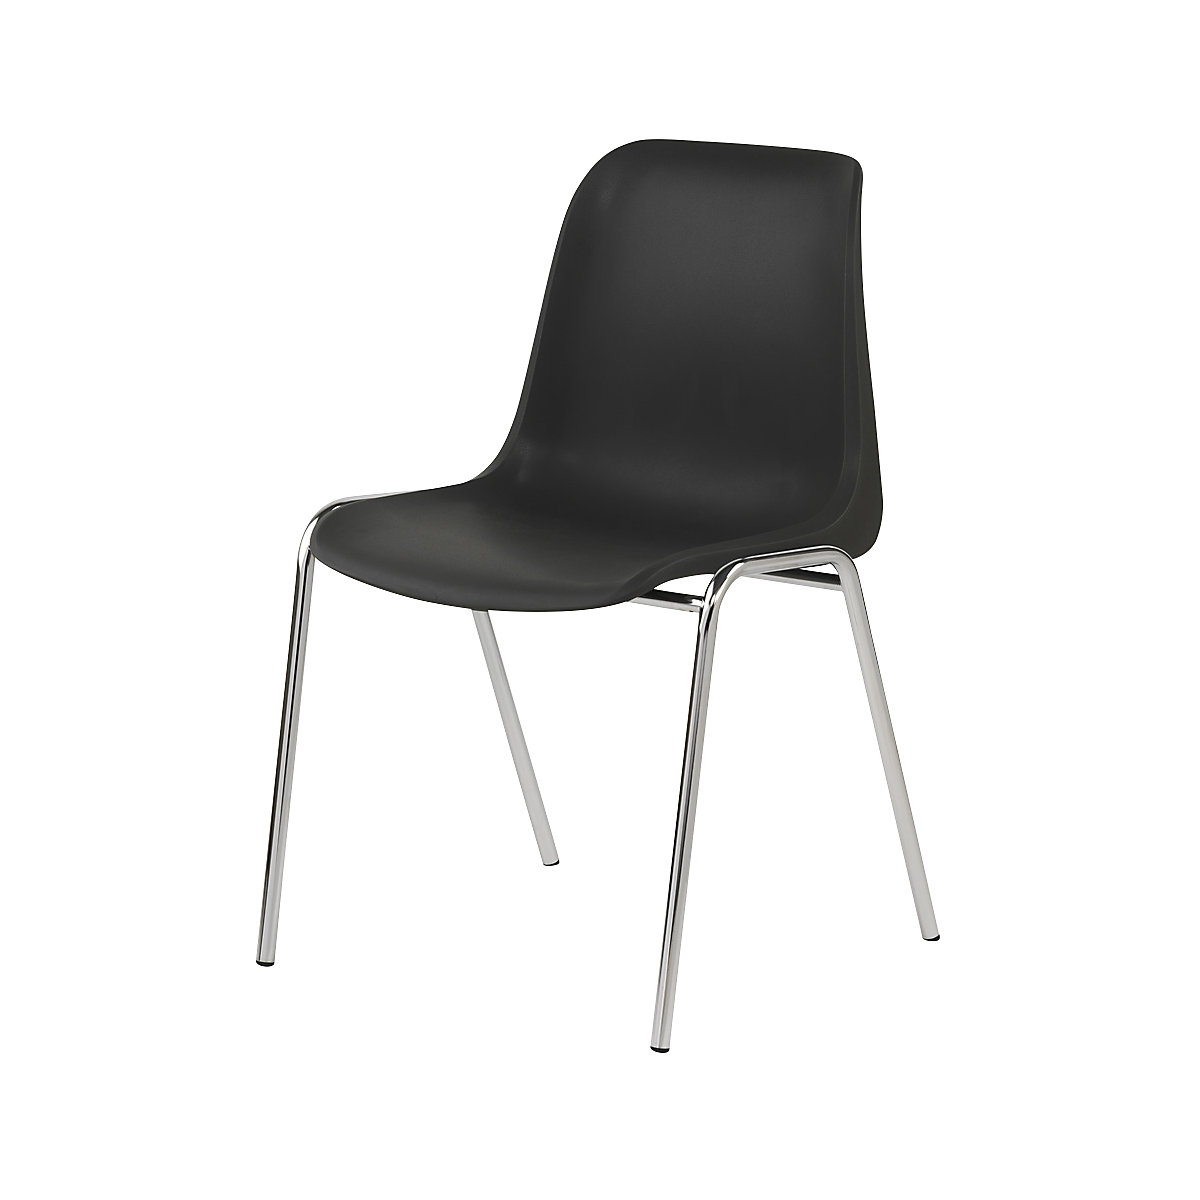 EUROPA plastic stacking chair